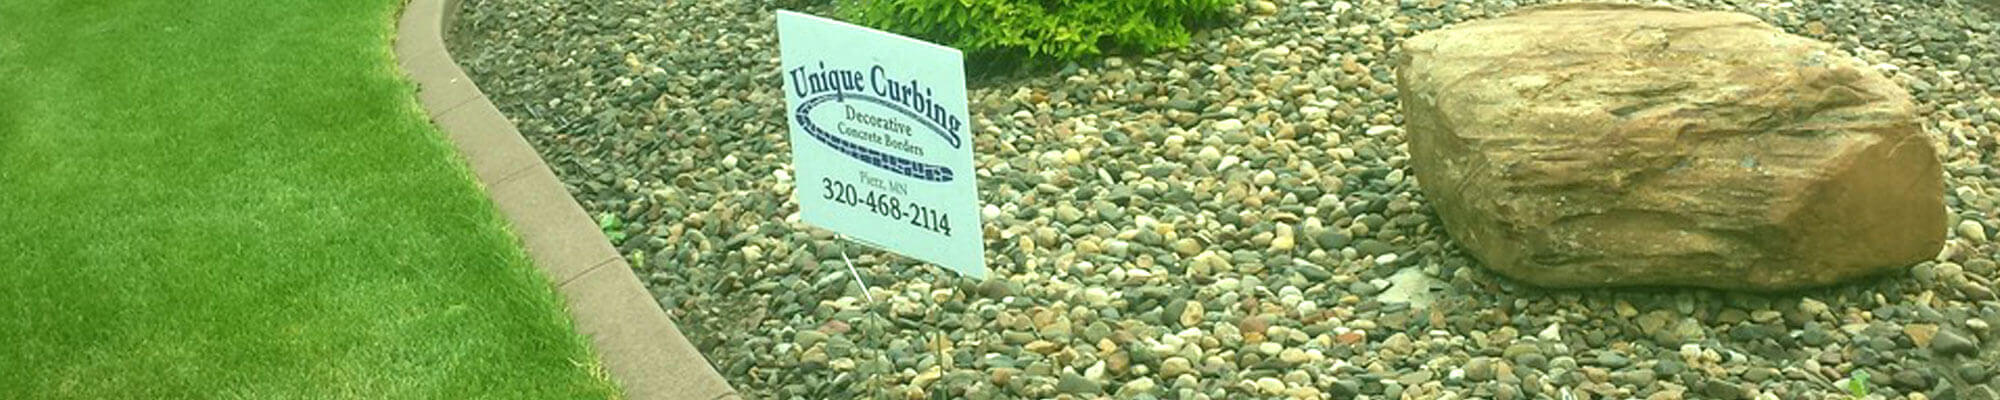 Rock garden edged with a continuous concrete border and showcasing a contractor's sign from Unique Curbing of Pierz, MN